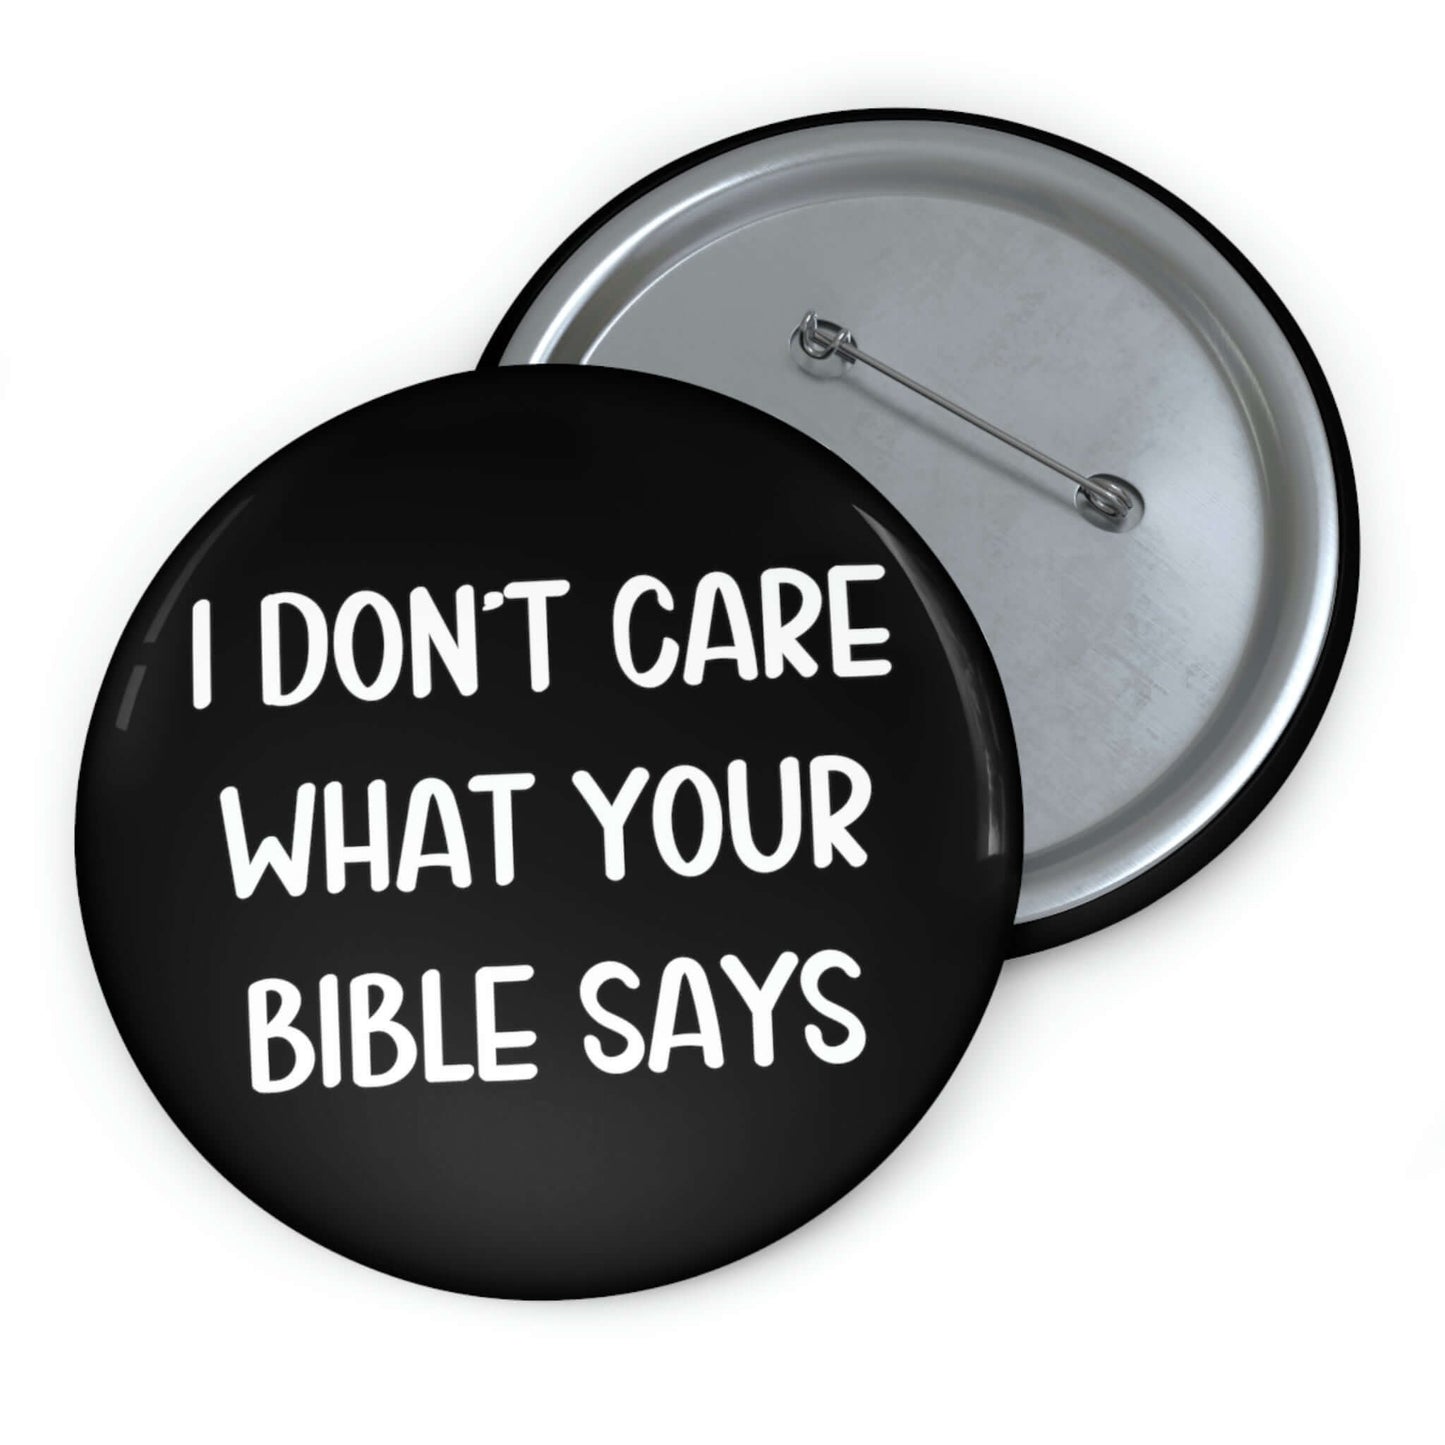 Pinback button that says I don't care what your bible says.